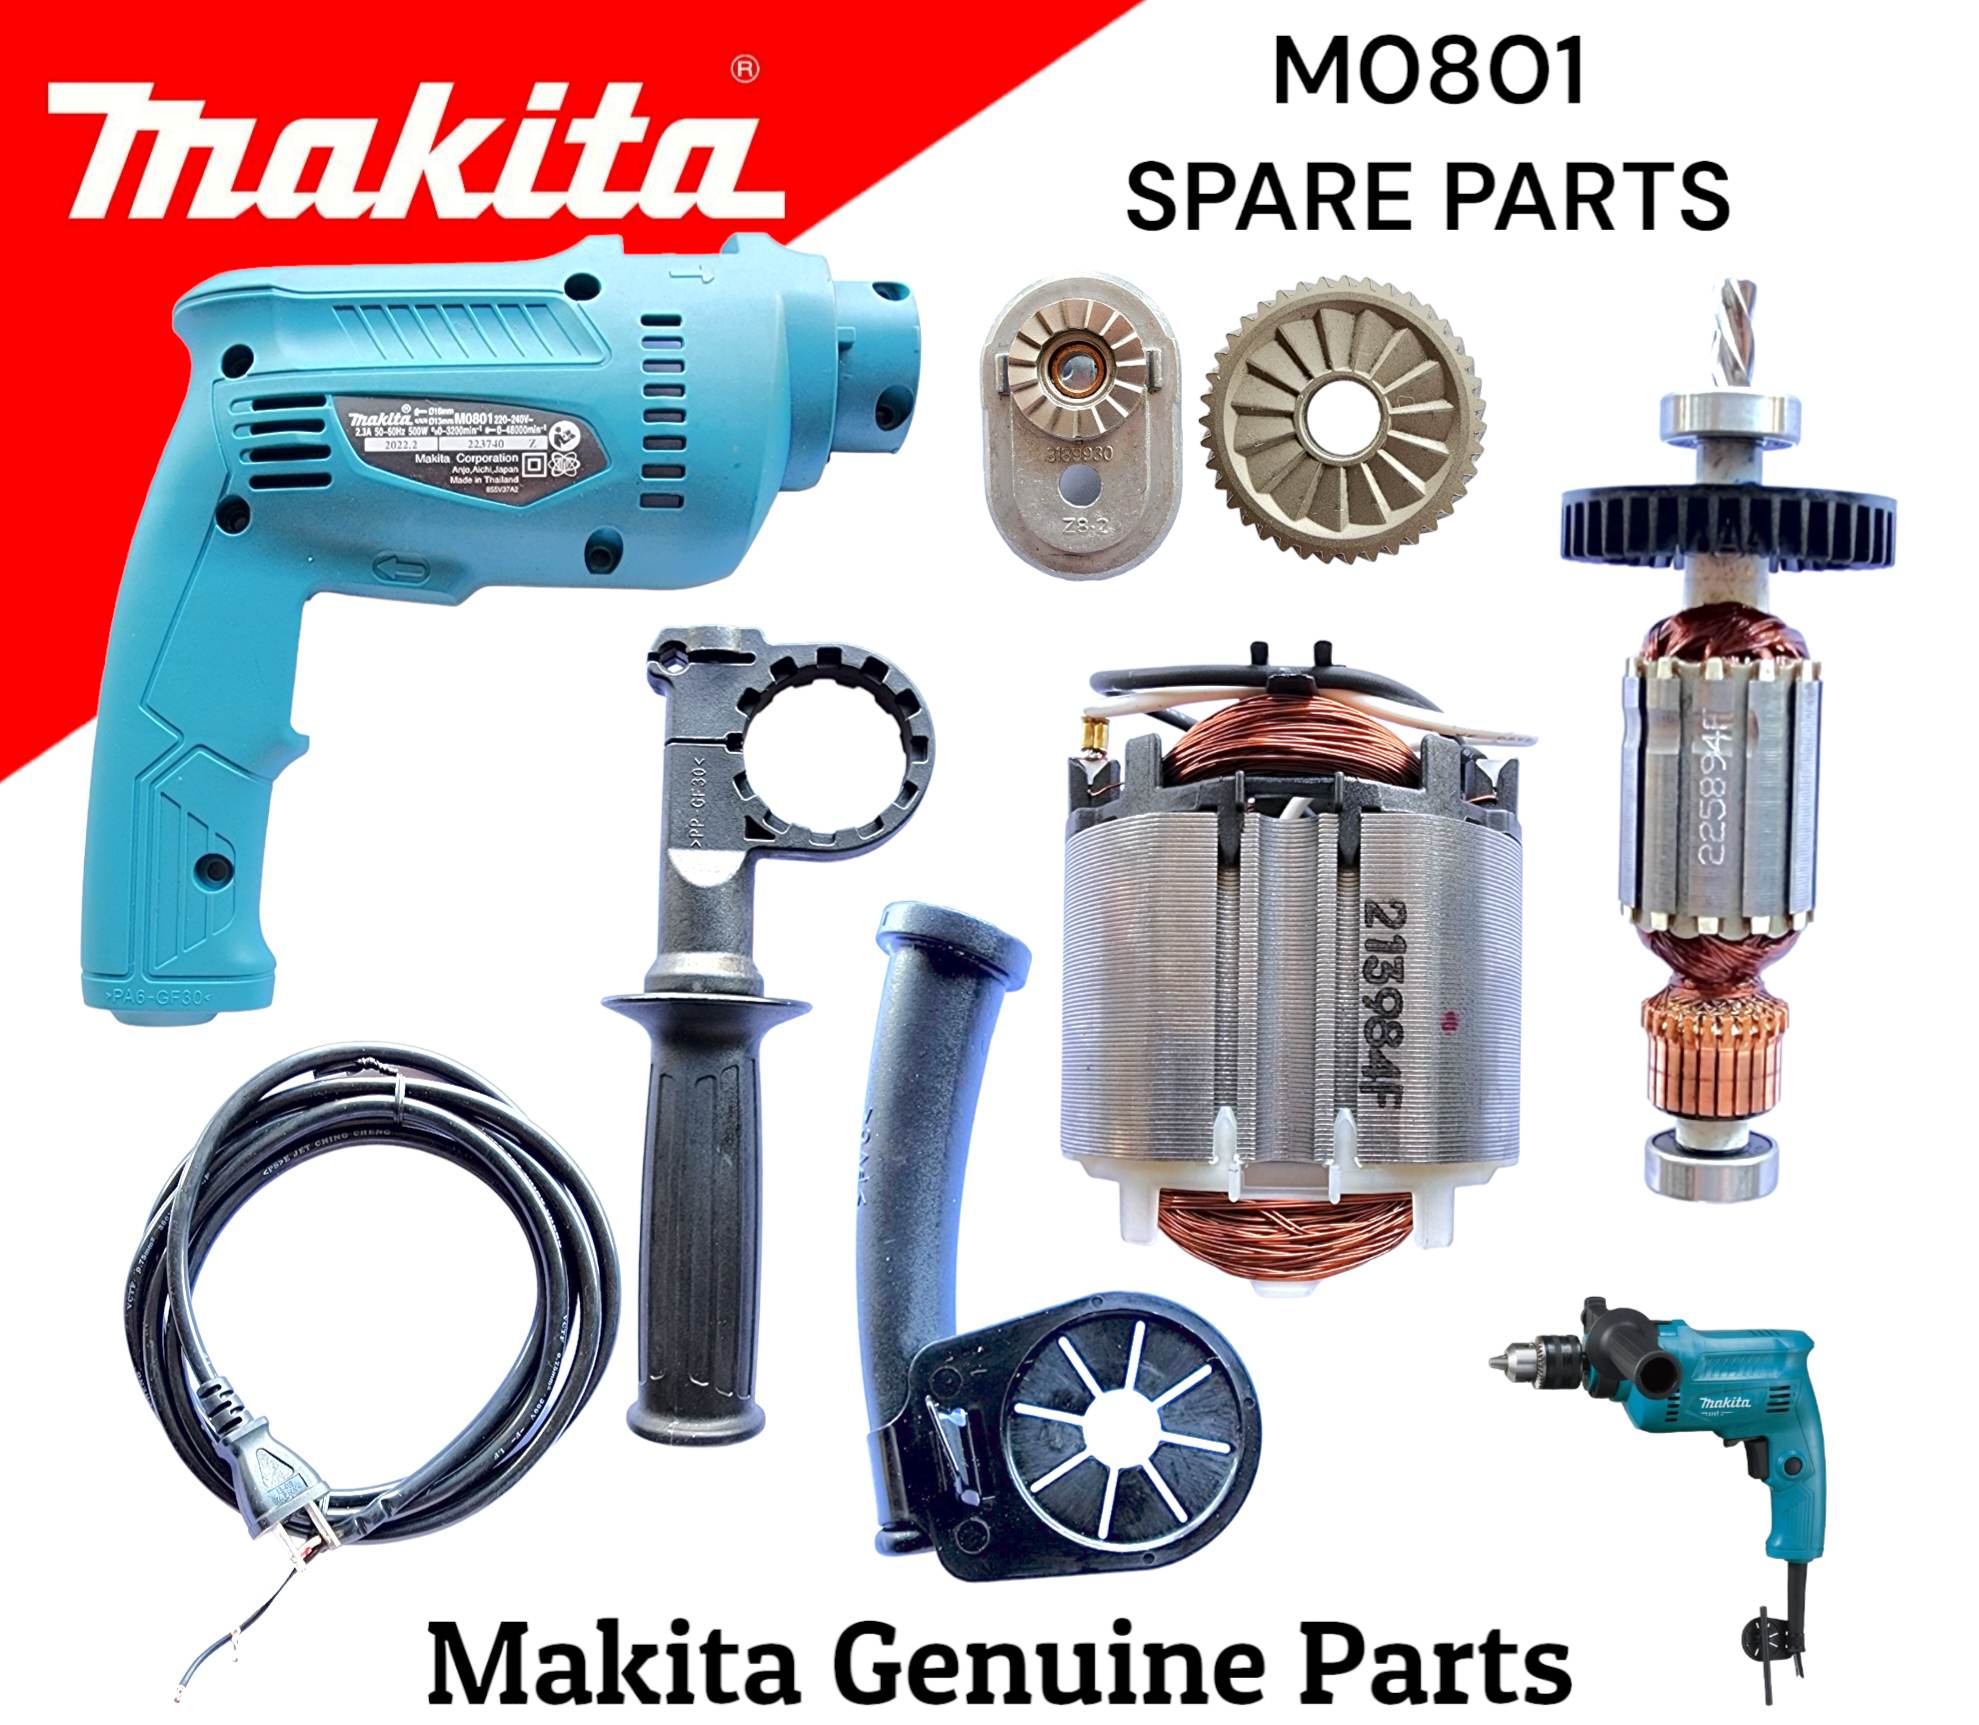 electric drill parts